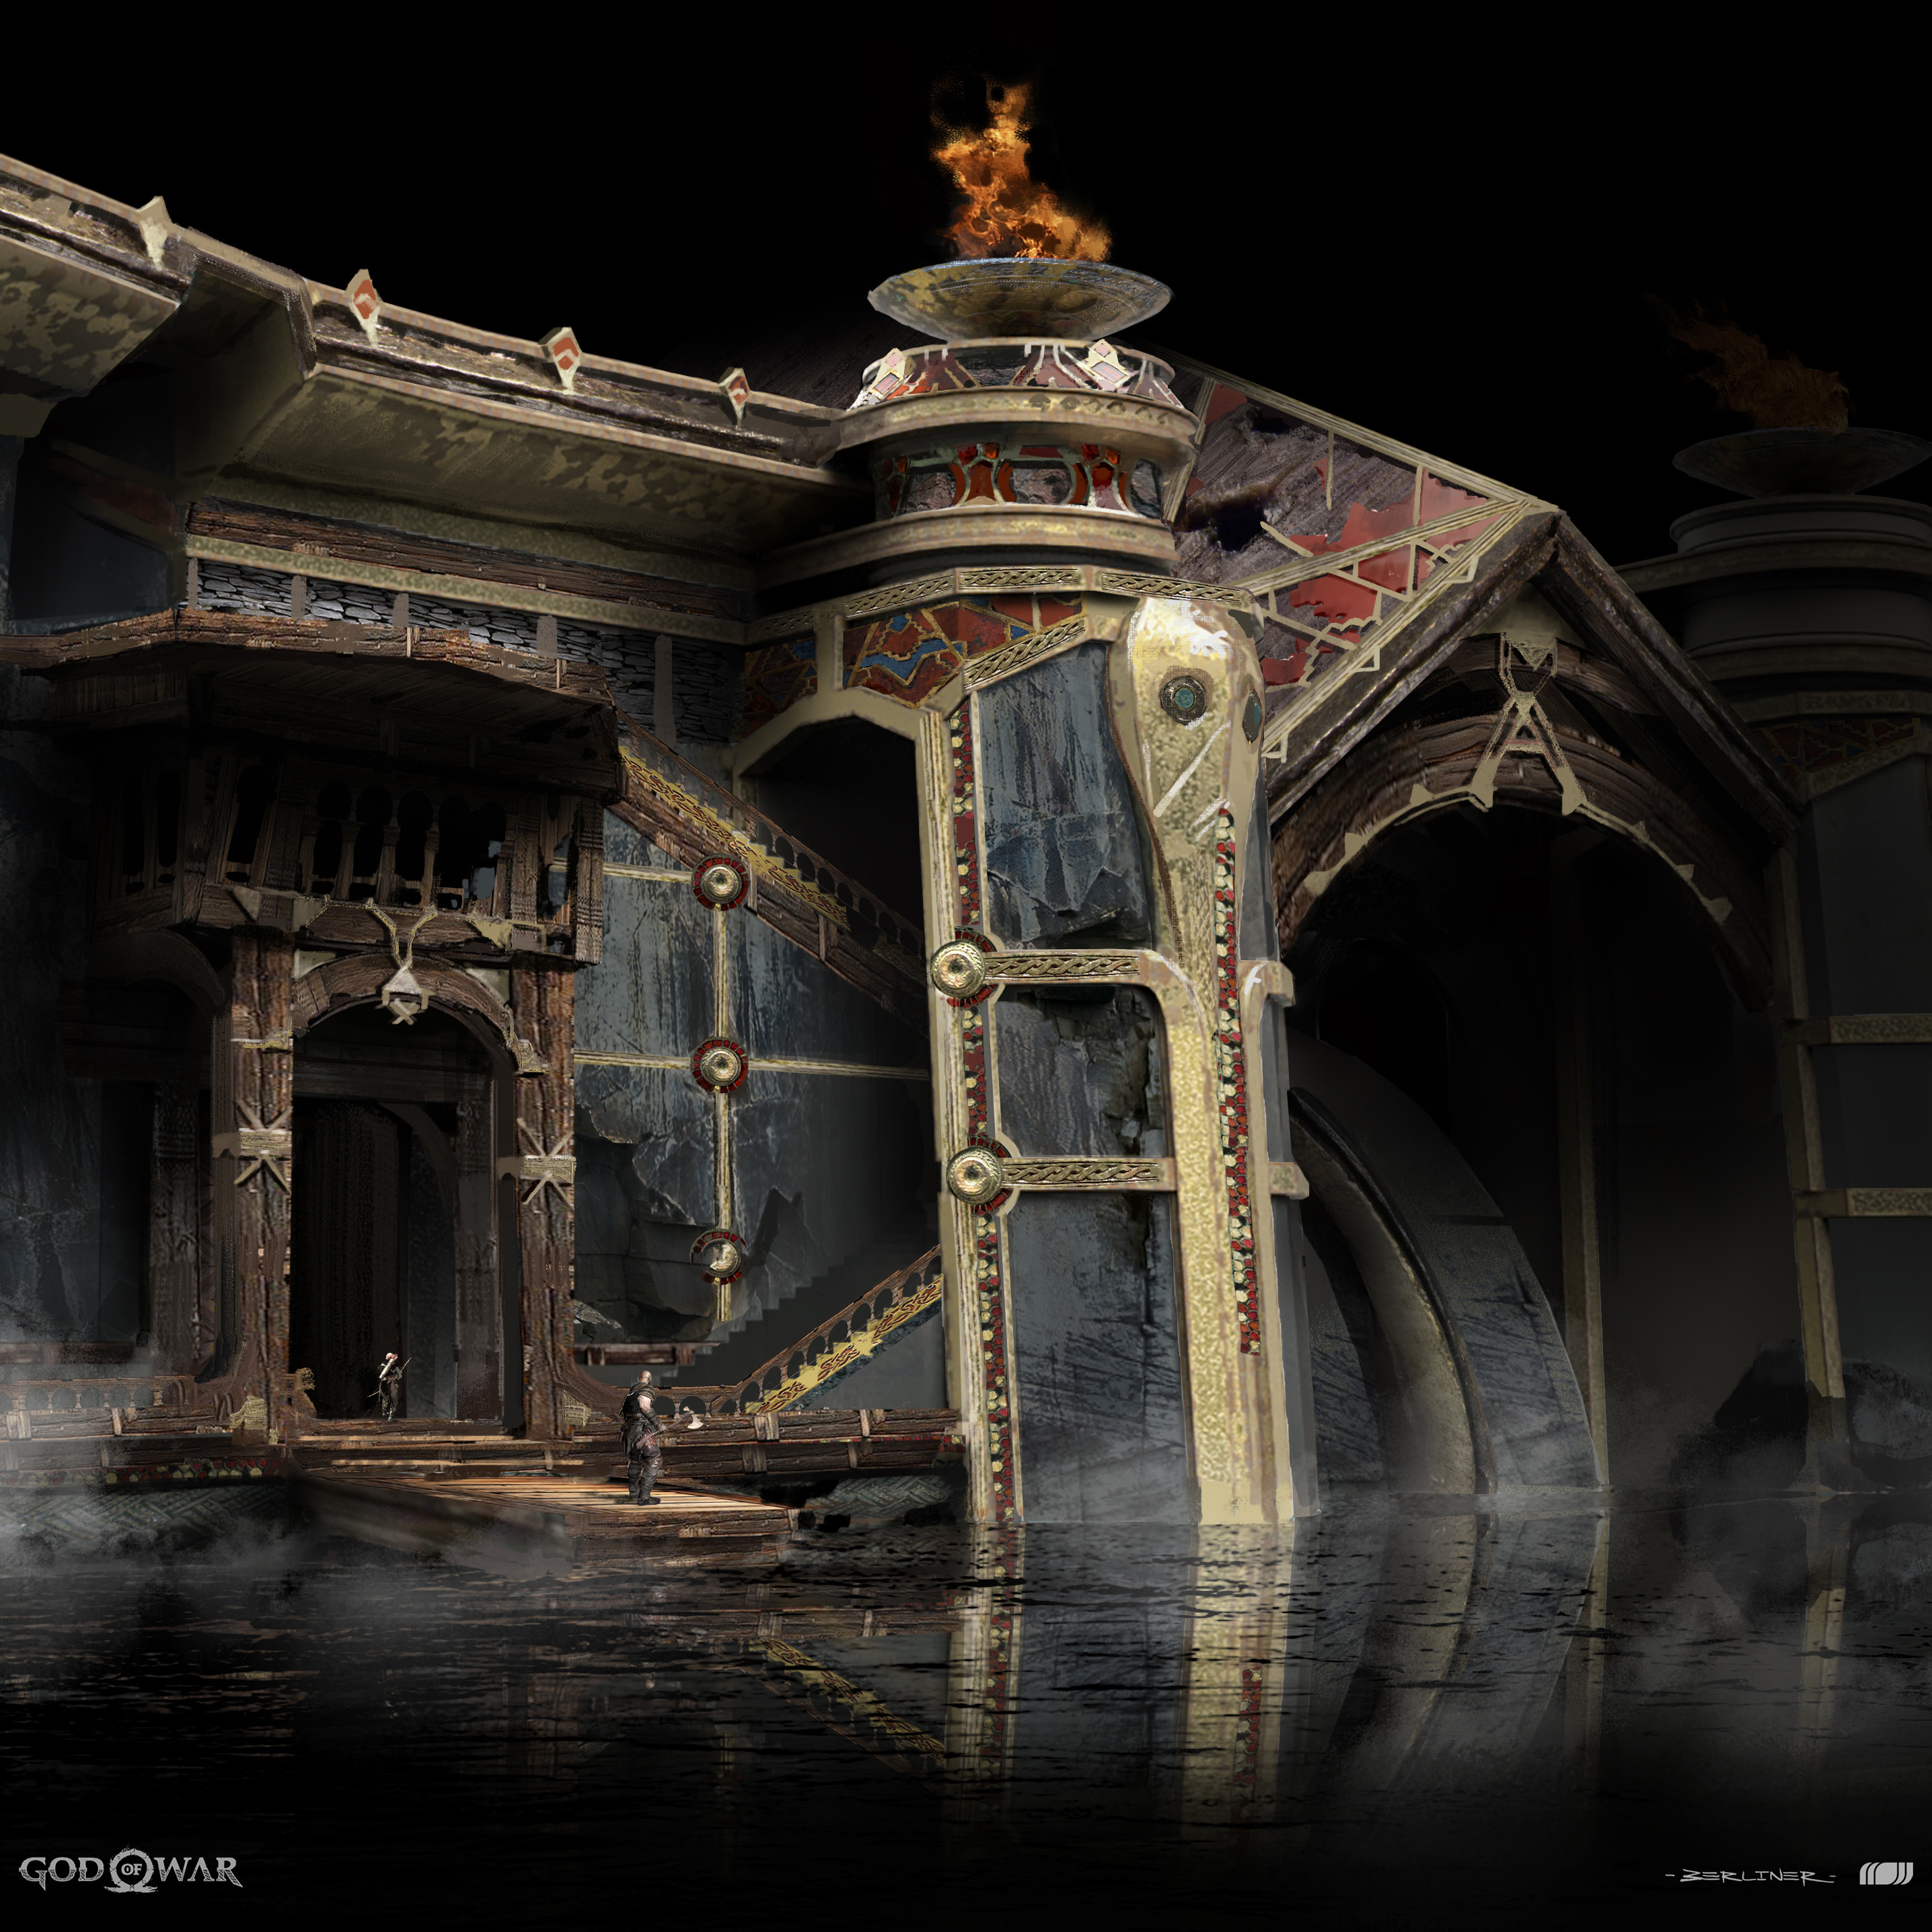 Black obsidian, richly colored glass, and finely detailed gold decorate the once great temple. 